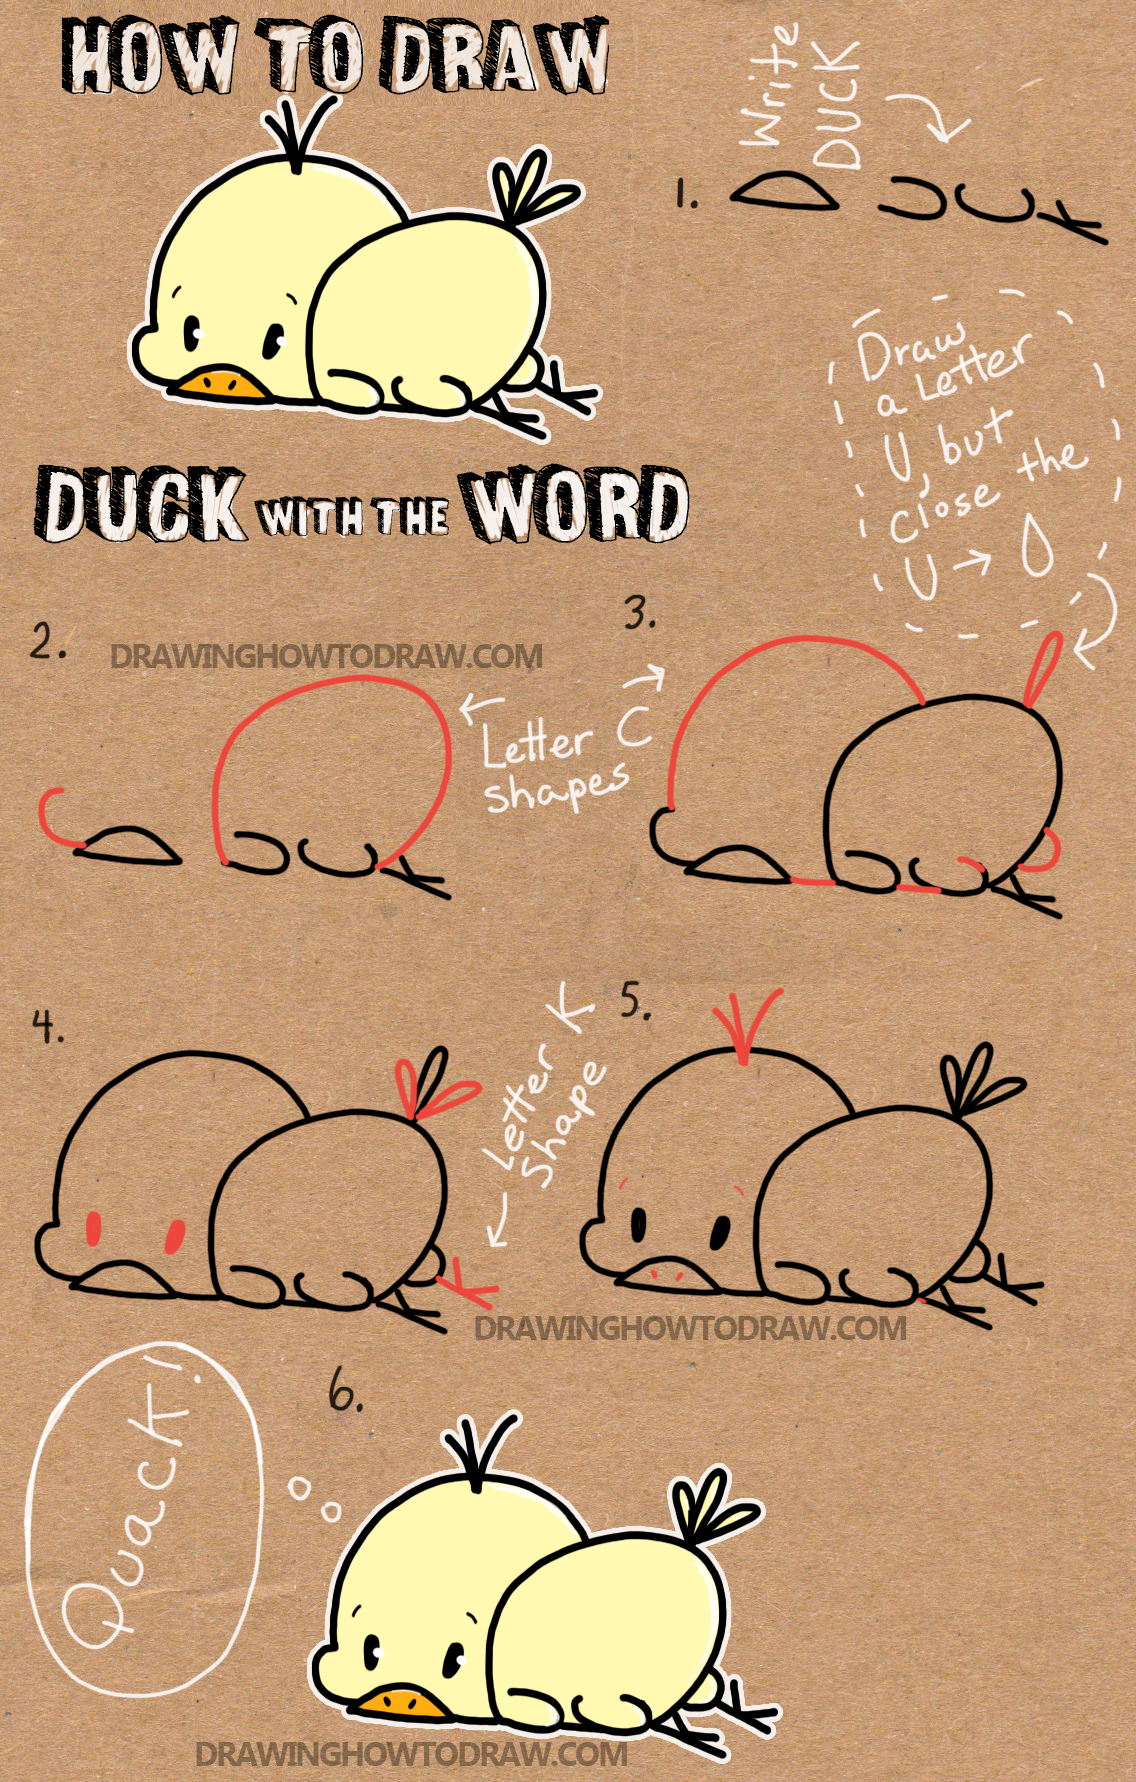 How to draw An Easy Duck step by step - Drawing Photos